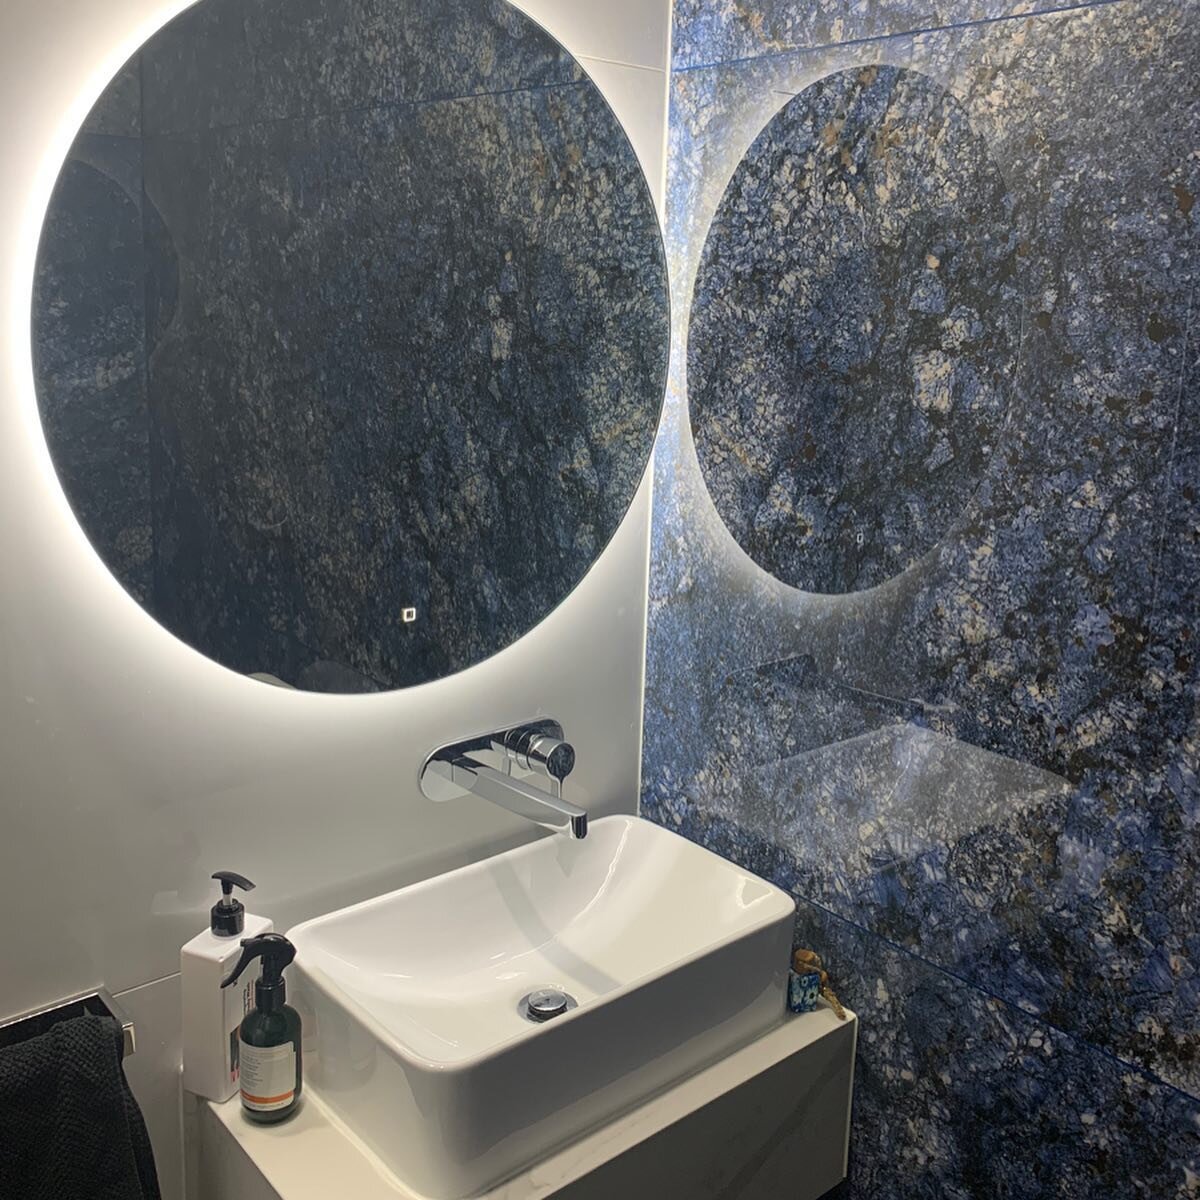 Scroll to see some quality stone and tile works by our team on all bathrooms and living area on our high end project in Portsea.